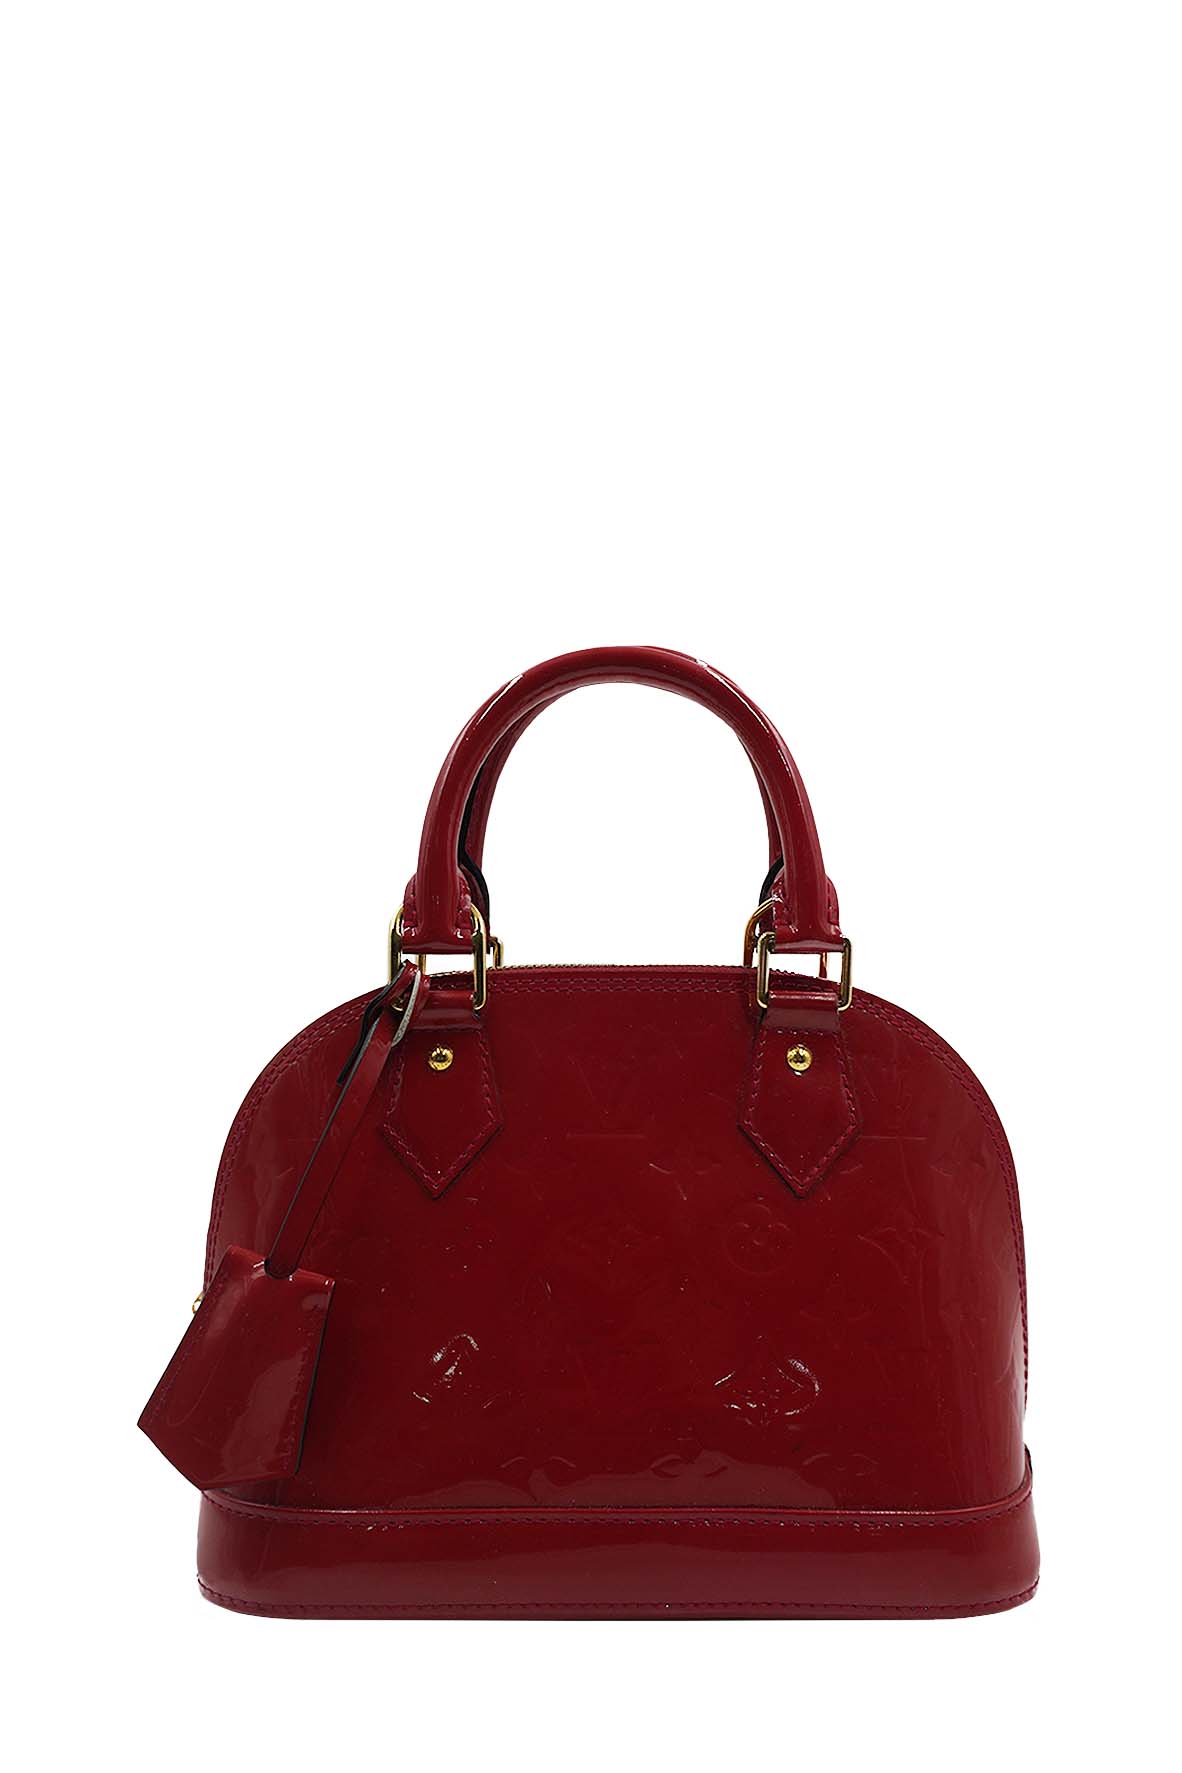 Louis Vuitton Alma Shoulder bag in Red Patent leather